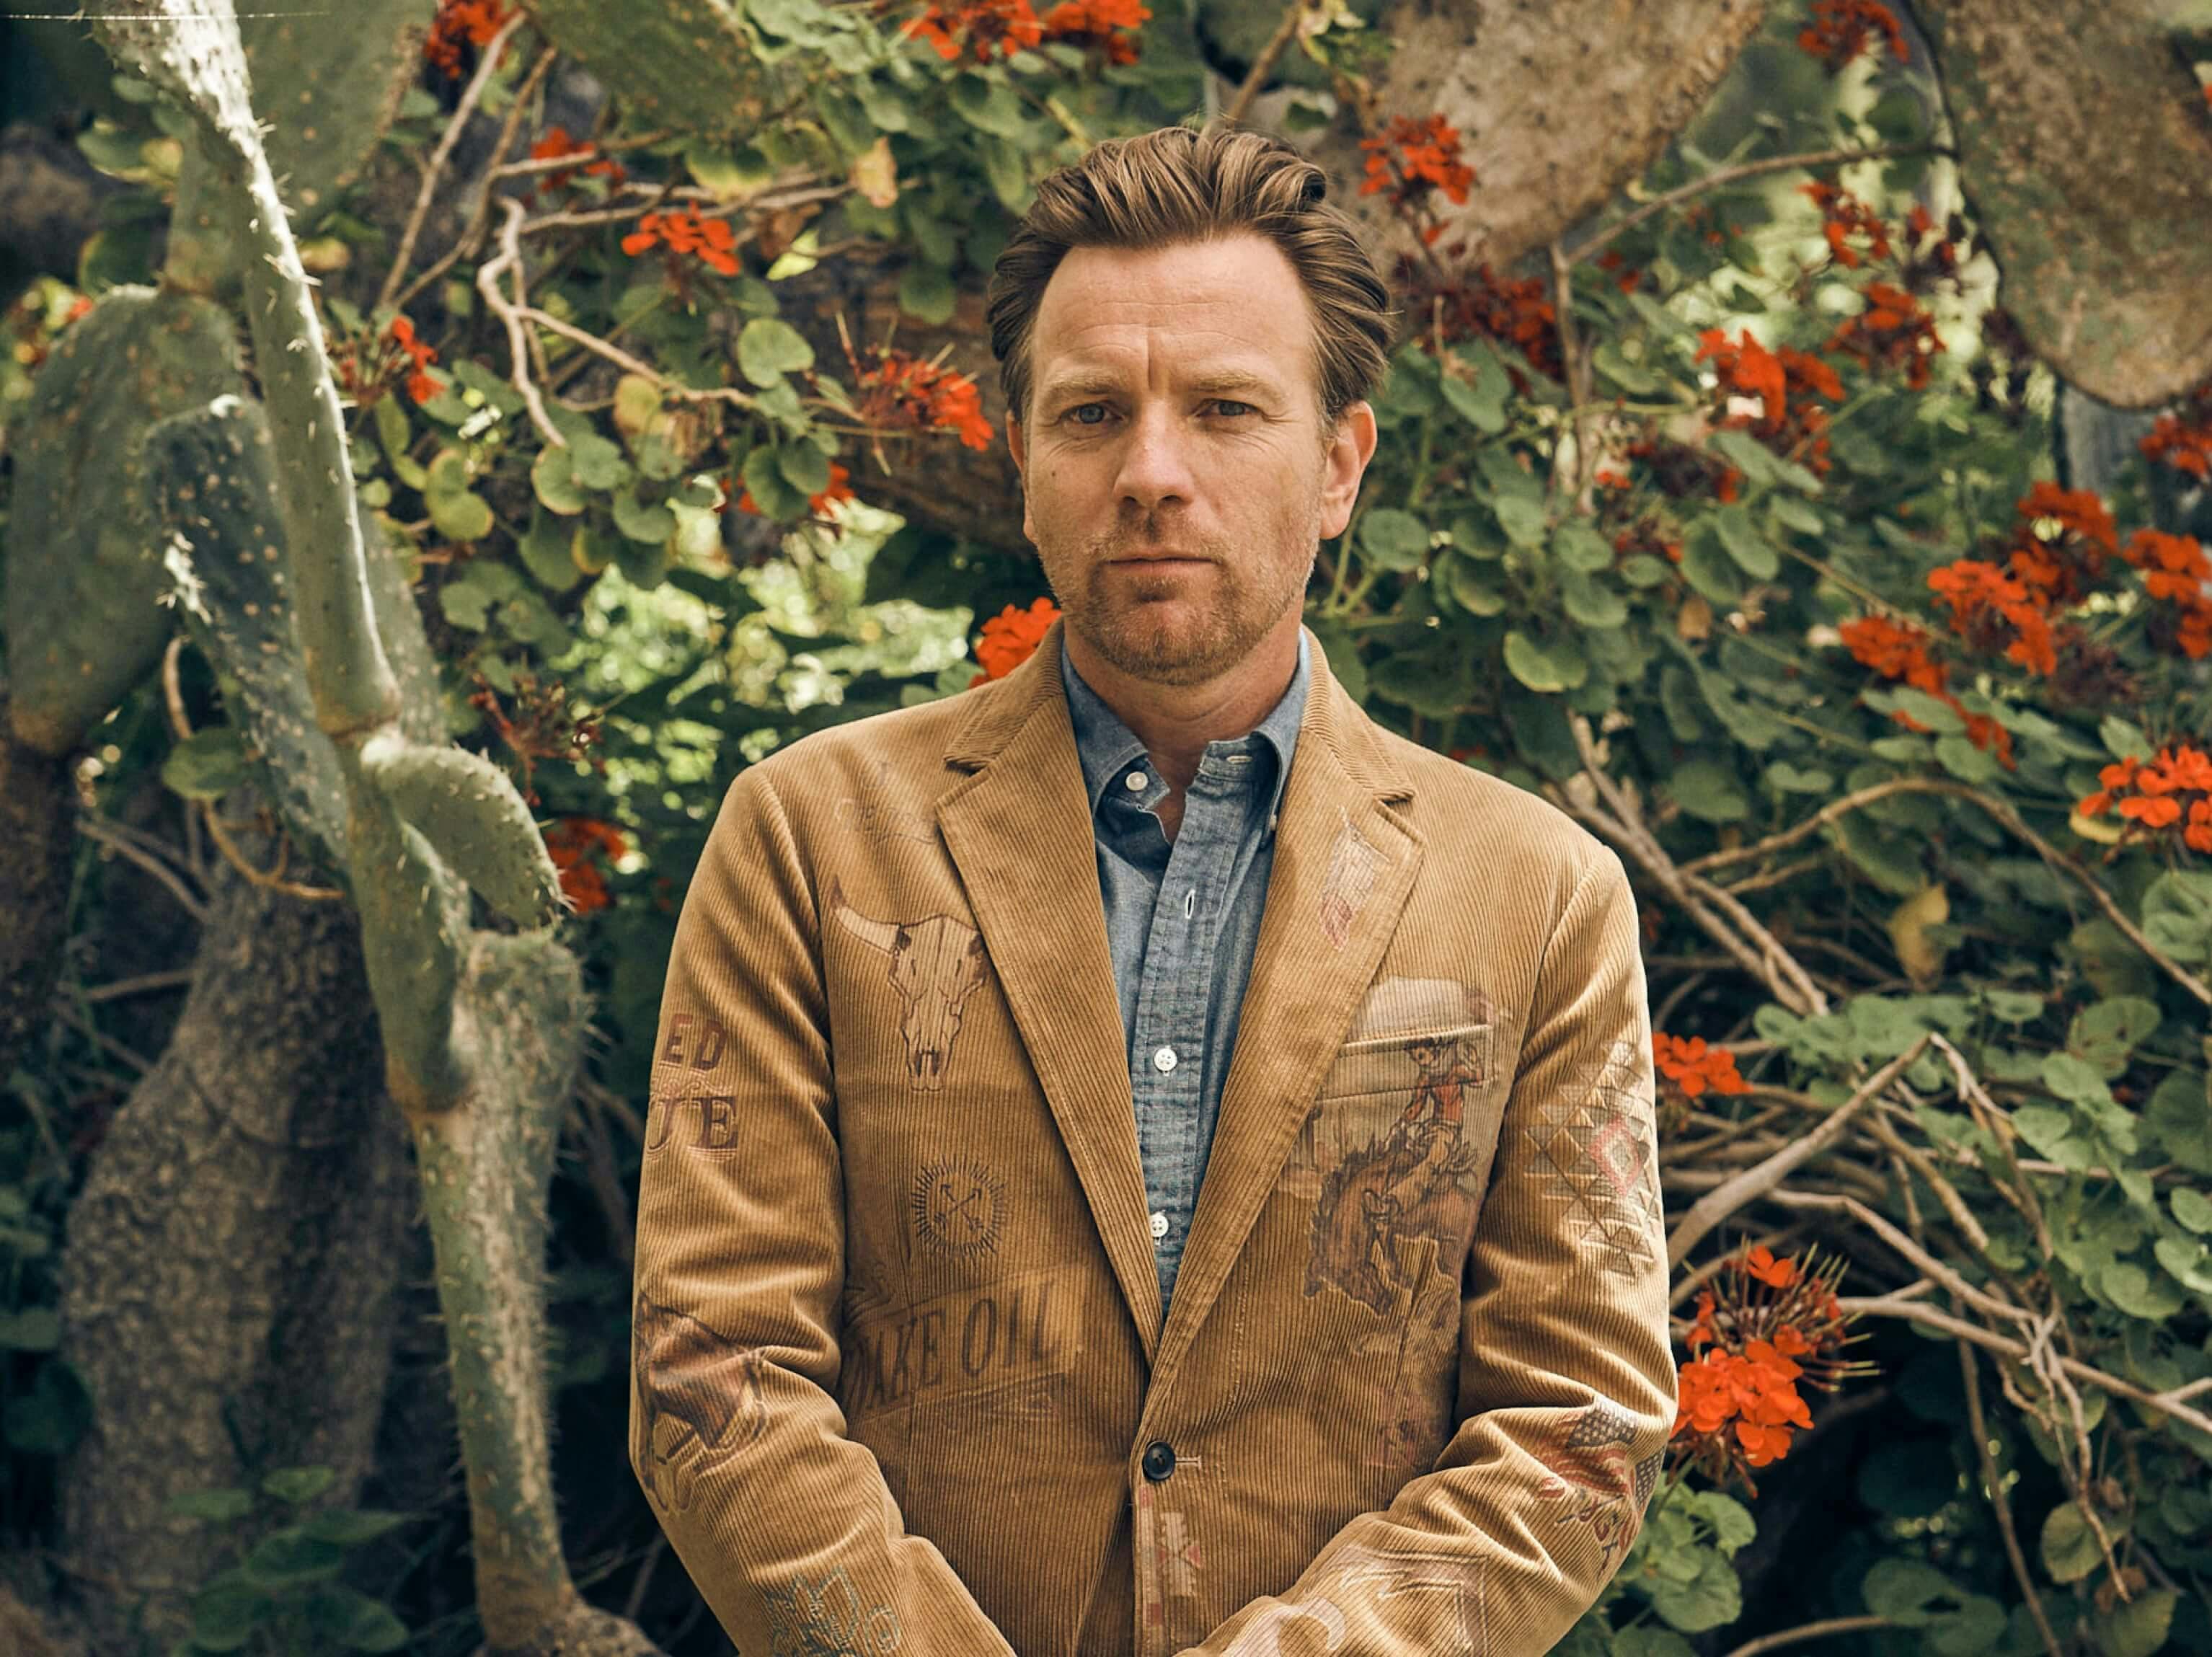 Ewan McGregor stands in front of a bush with red flowers and green leaves. He wears a tan coat and a grey shirt beneath. His hair is slicked back and he looks discerningly at the camera. 